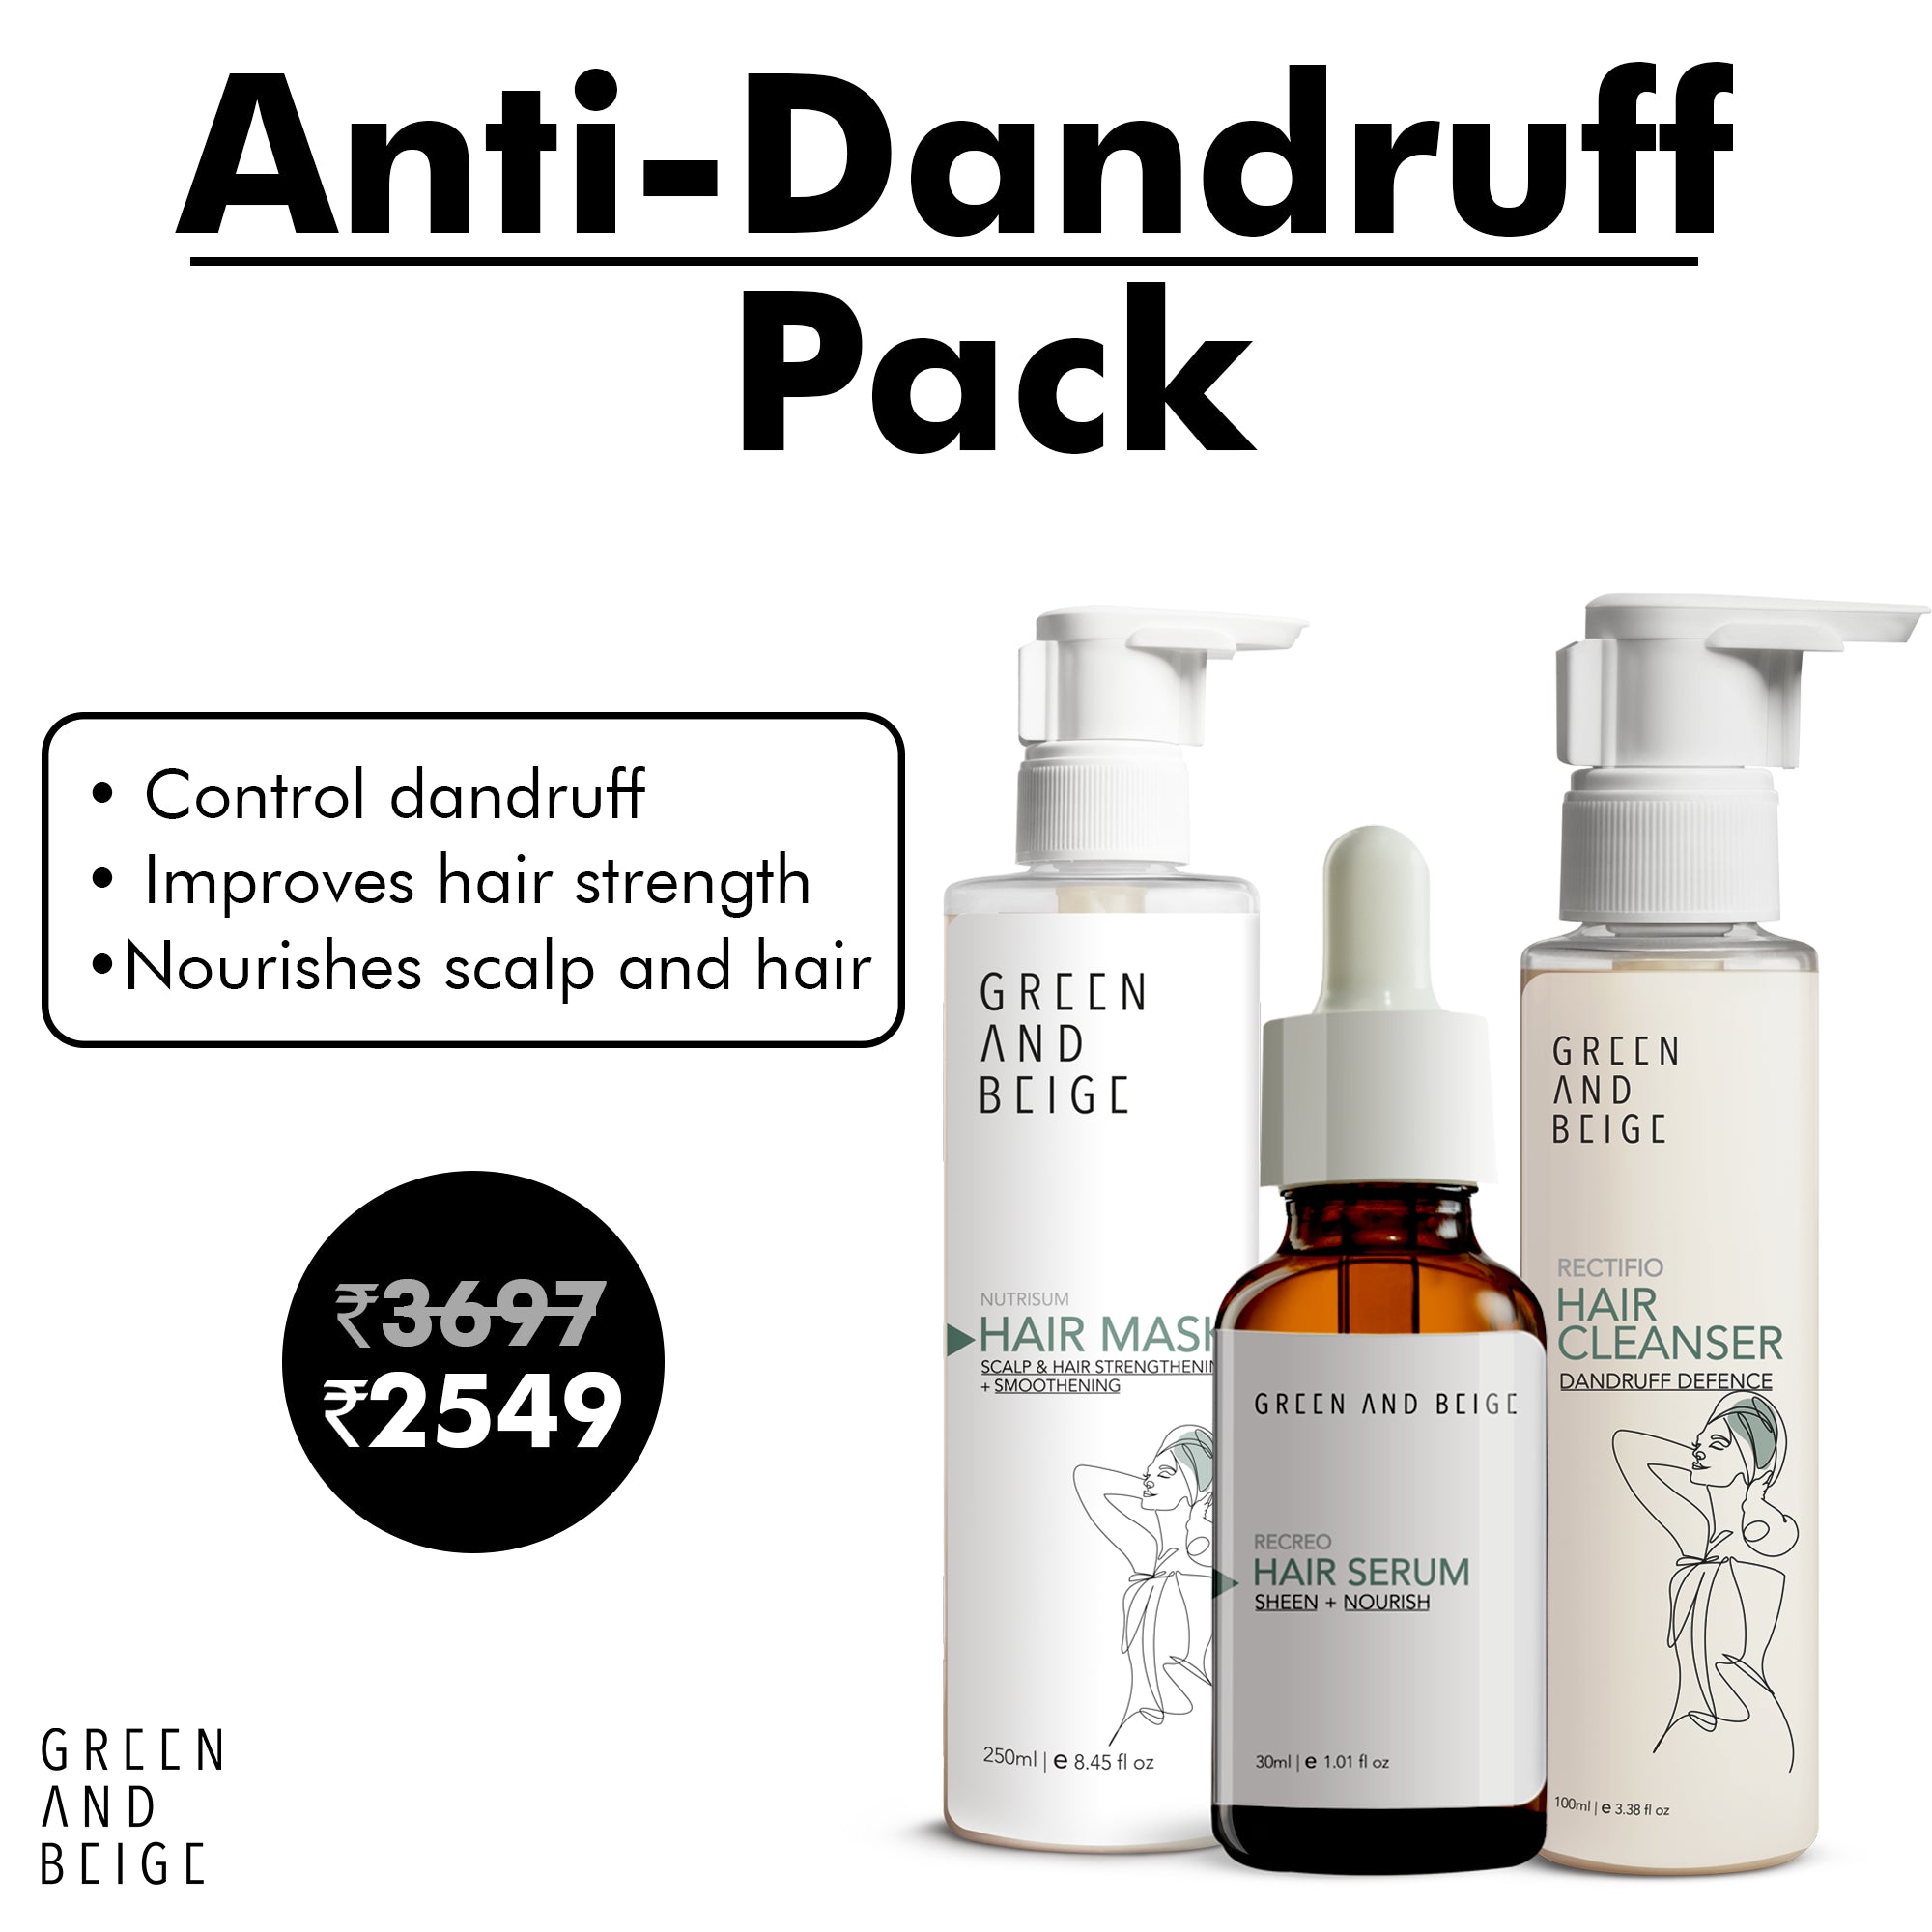 Dandruff Defence Hair Care Combo!